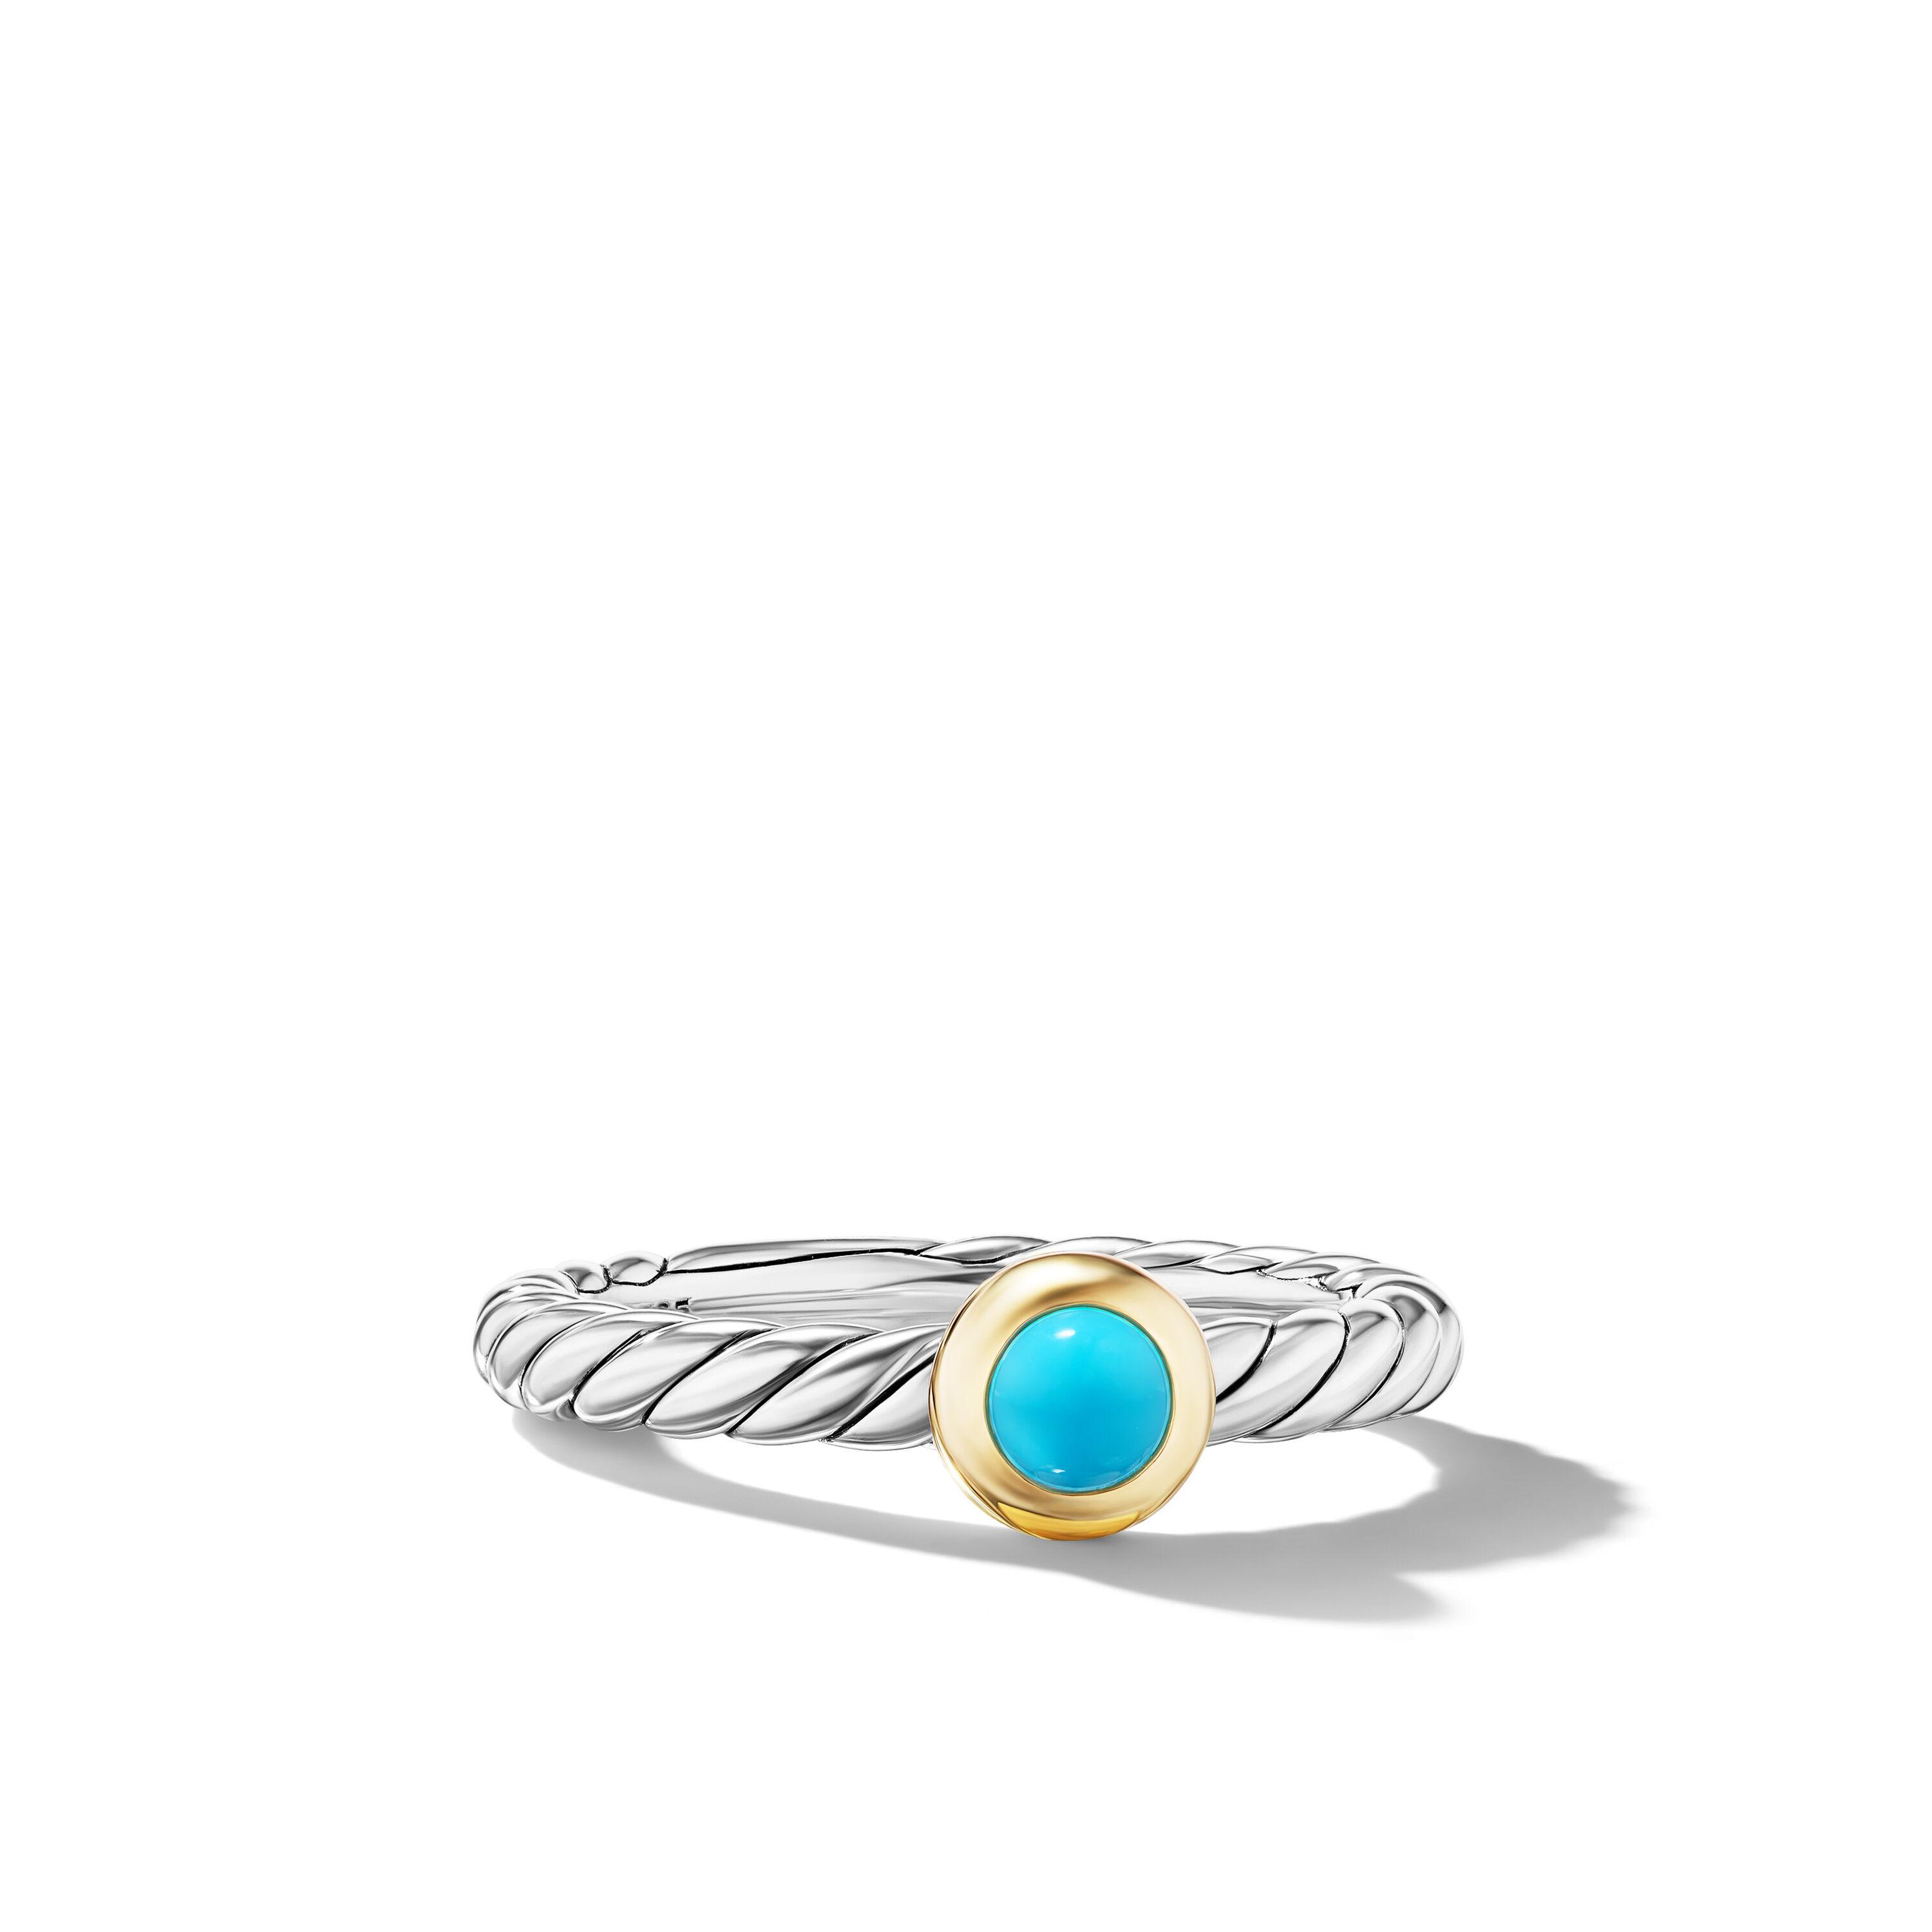 David Yurman Petite Cable Ring in Sterling Silver with 14K Yellow Gold and Turquoise, Size 6 0